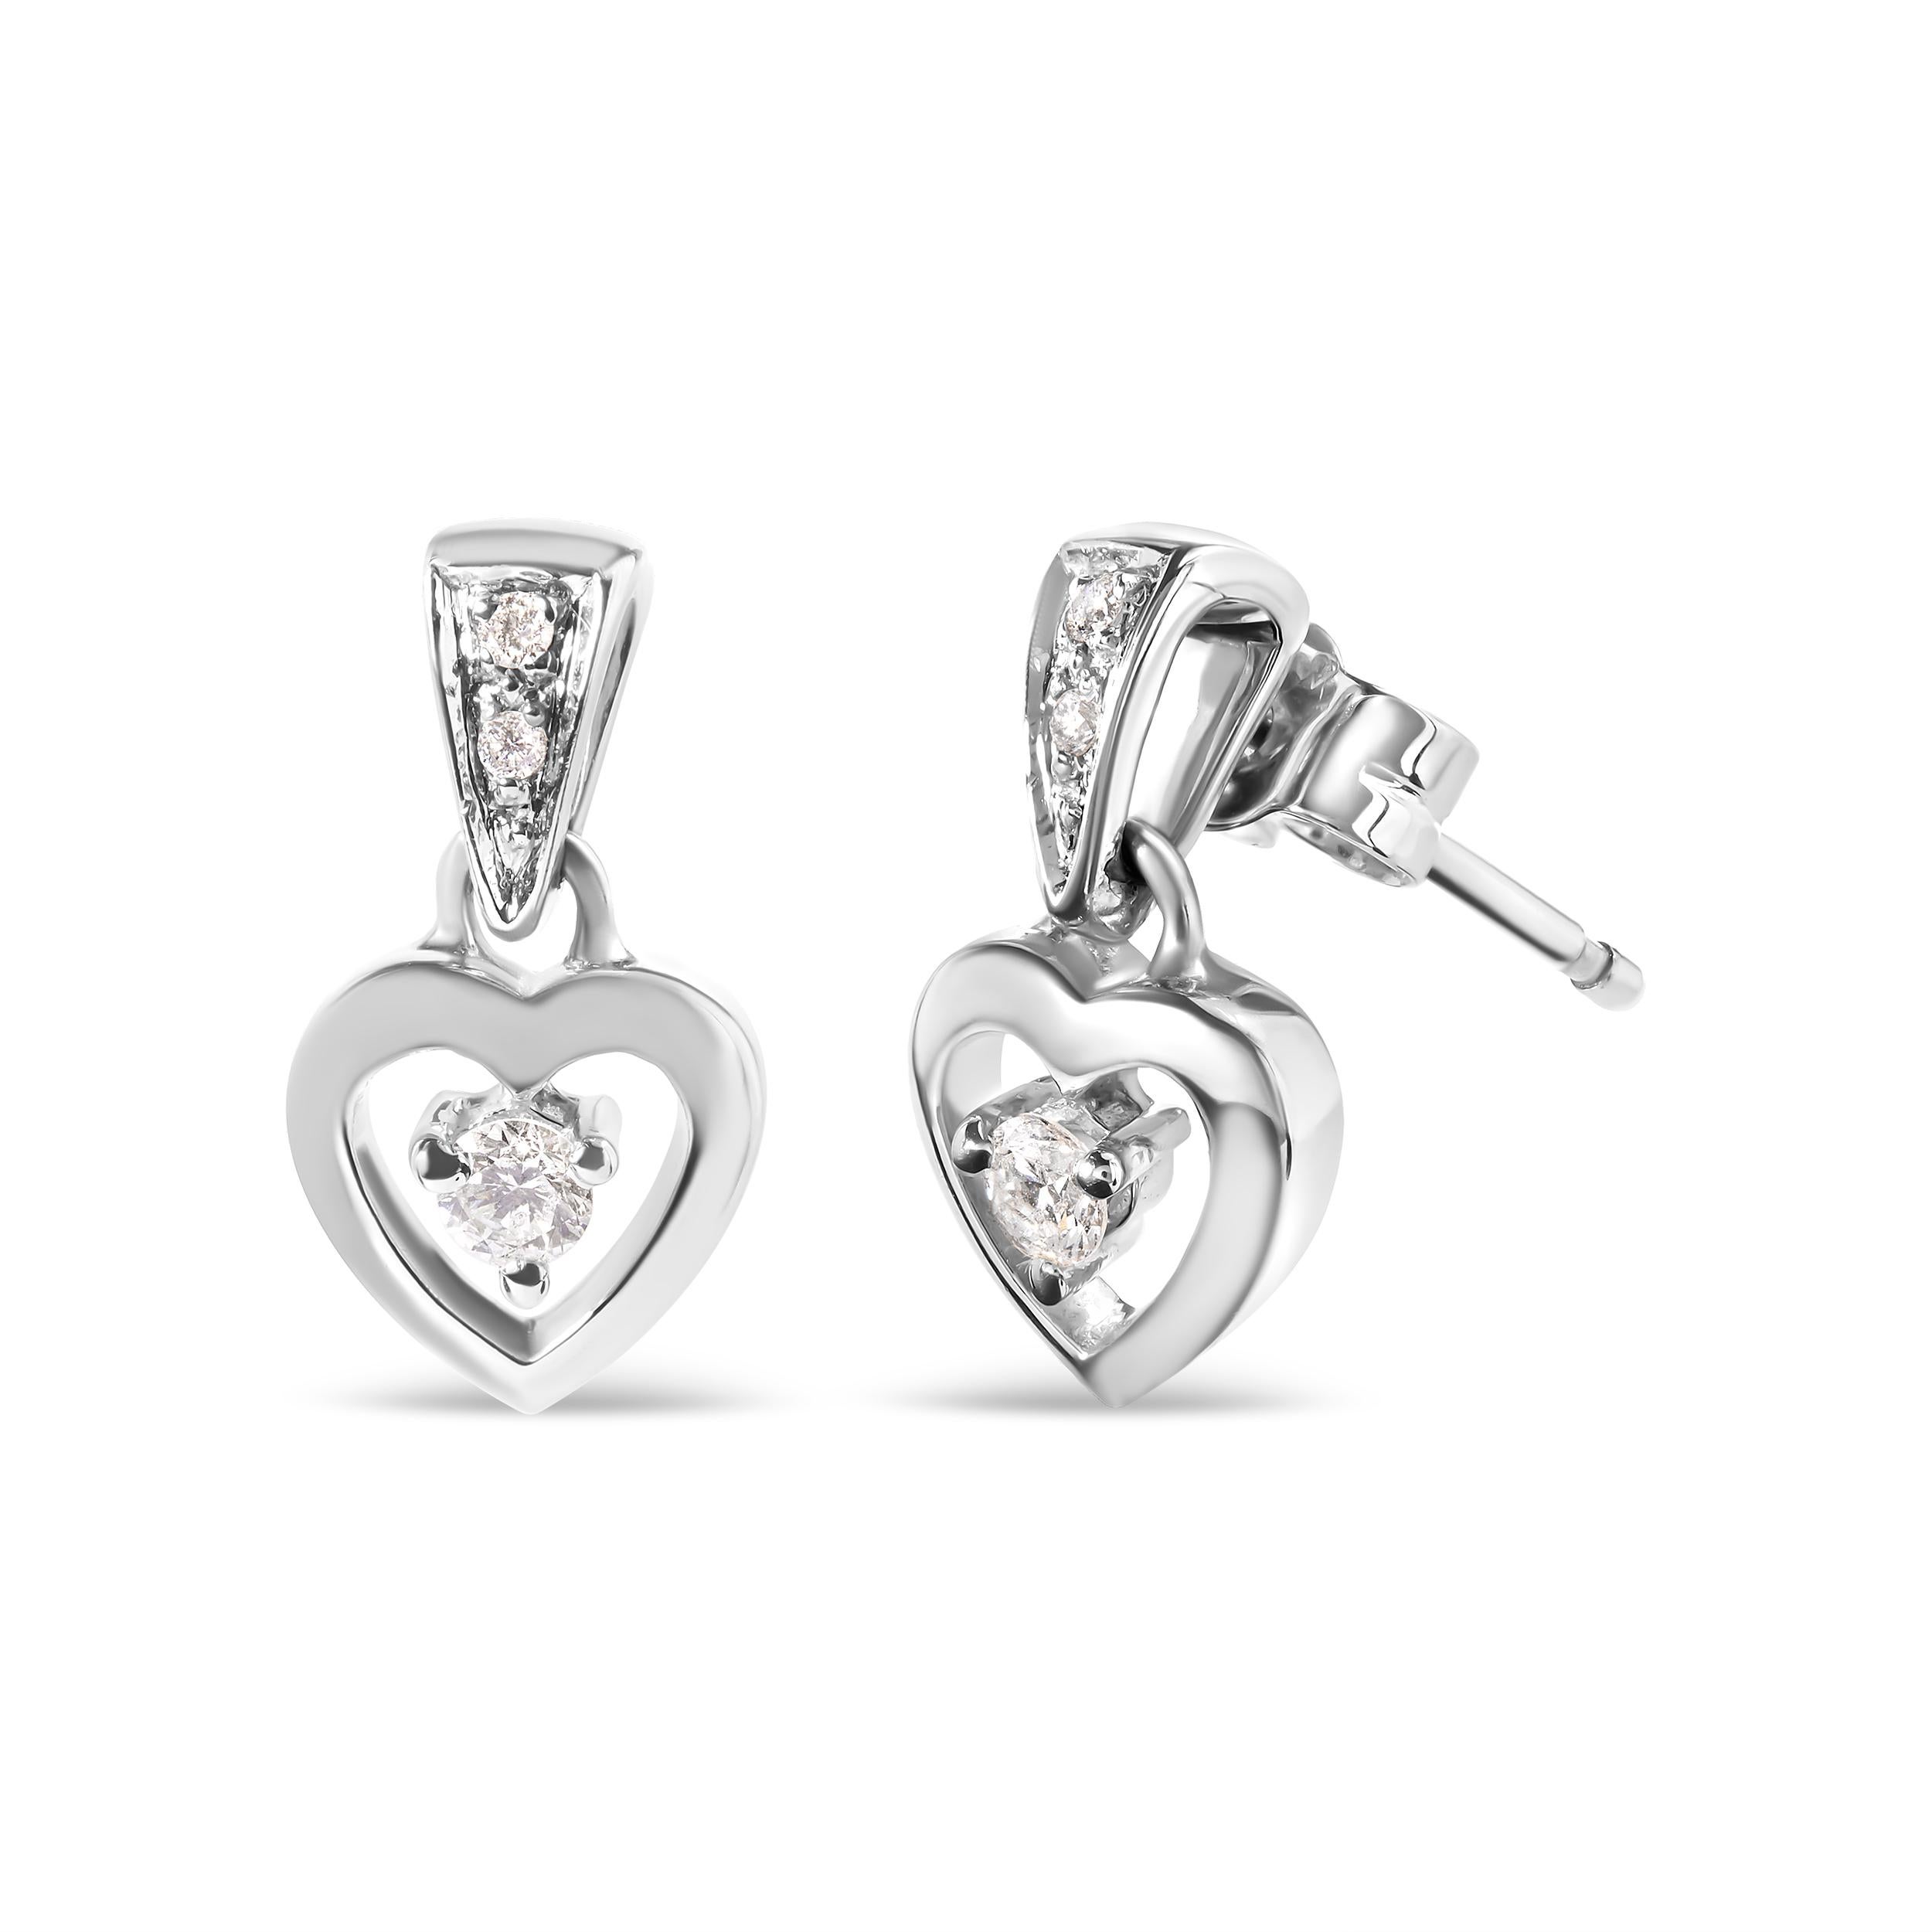 You will fall in love with these beautiful dangle heart stud earrings. Fashioned in 14k white gold, they feature 1/6 ct TDW of twinkling round cut diamonds. A cut out of a heart holds in its center a round cut diamond and delicately dangles from a